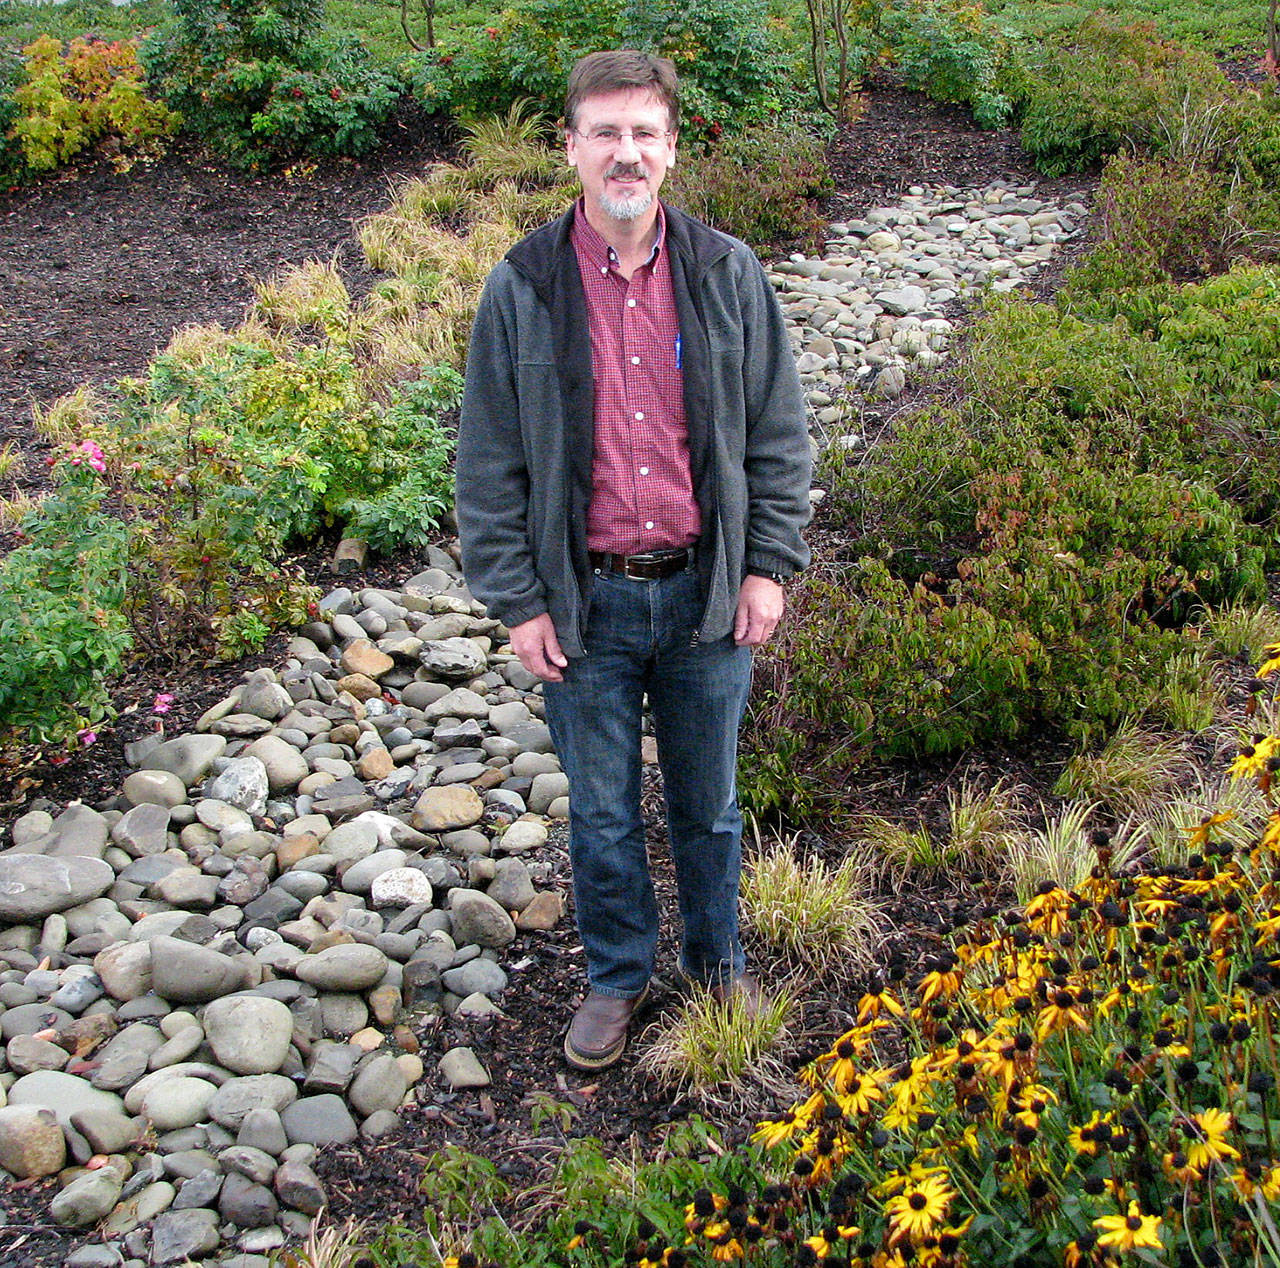 Joe Holtrop, Clallam Conservation District executive director, pictured in the rain garden at the Clallam County Courthouse, presents “Rain Gardens and Runoff” on Thursday in Port Angeles. (Amanda Rosenberg)